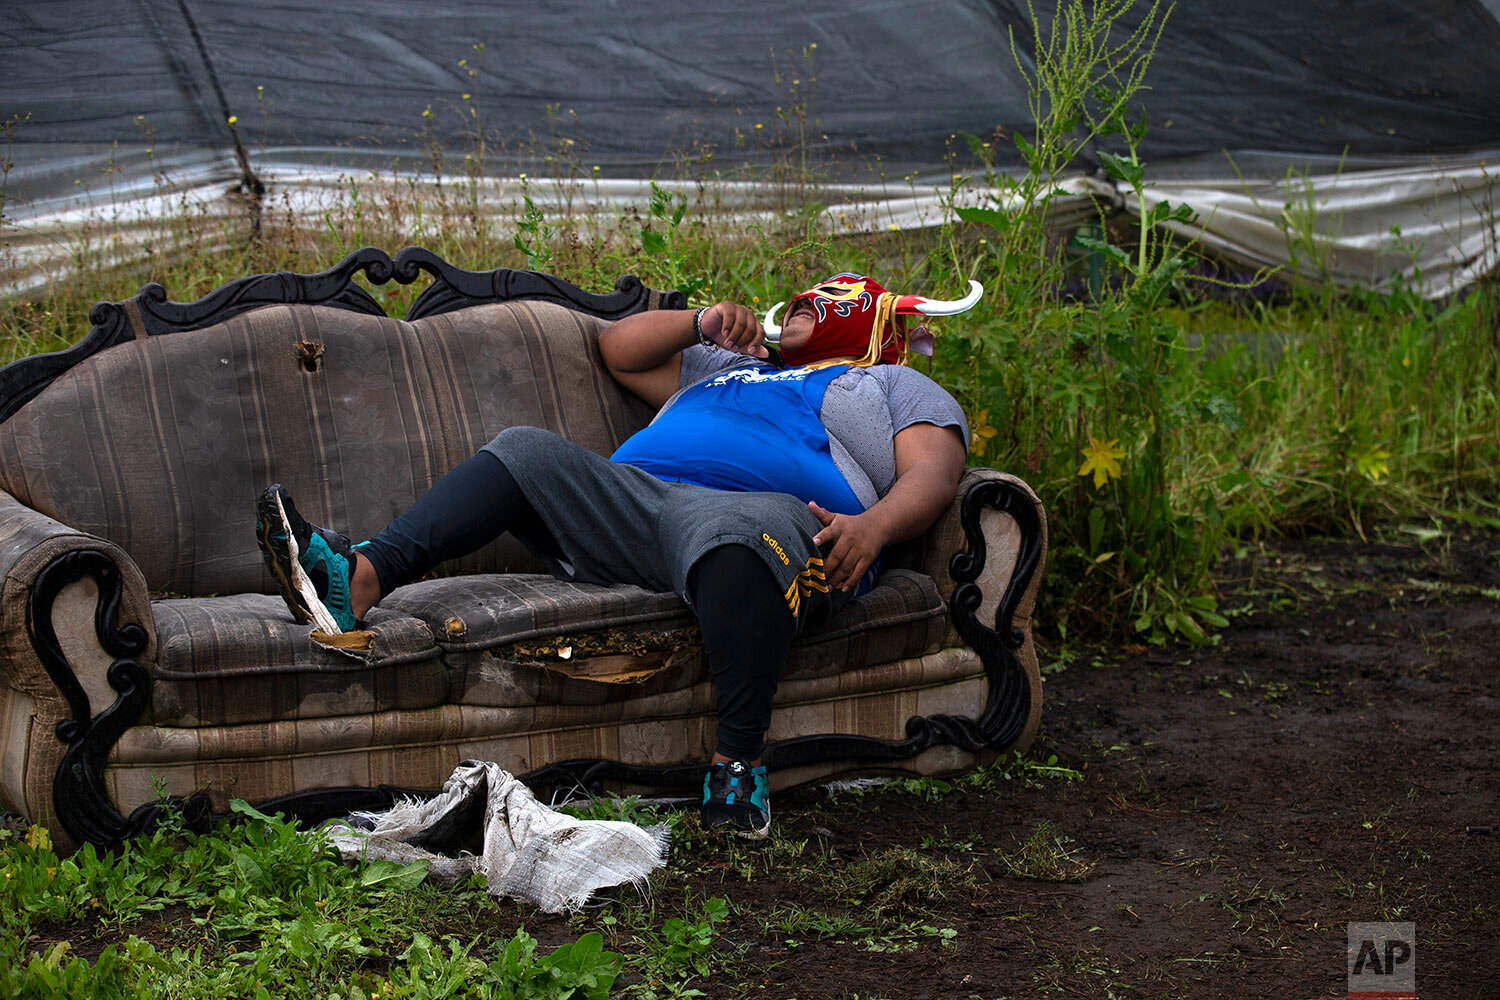  Lucha Libre fighter "Mister Jerry," whose two brothers are also fighters, rests after training amid Xochimilco's famous floating gardens on the outskirts of Mexico City, Thursday, Aug. 20, 2020. (AP Photo/Marco Ugarte) 